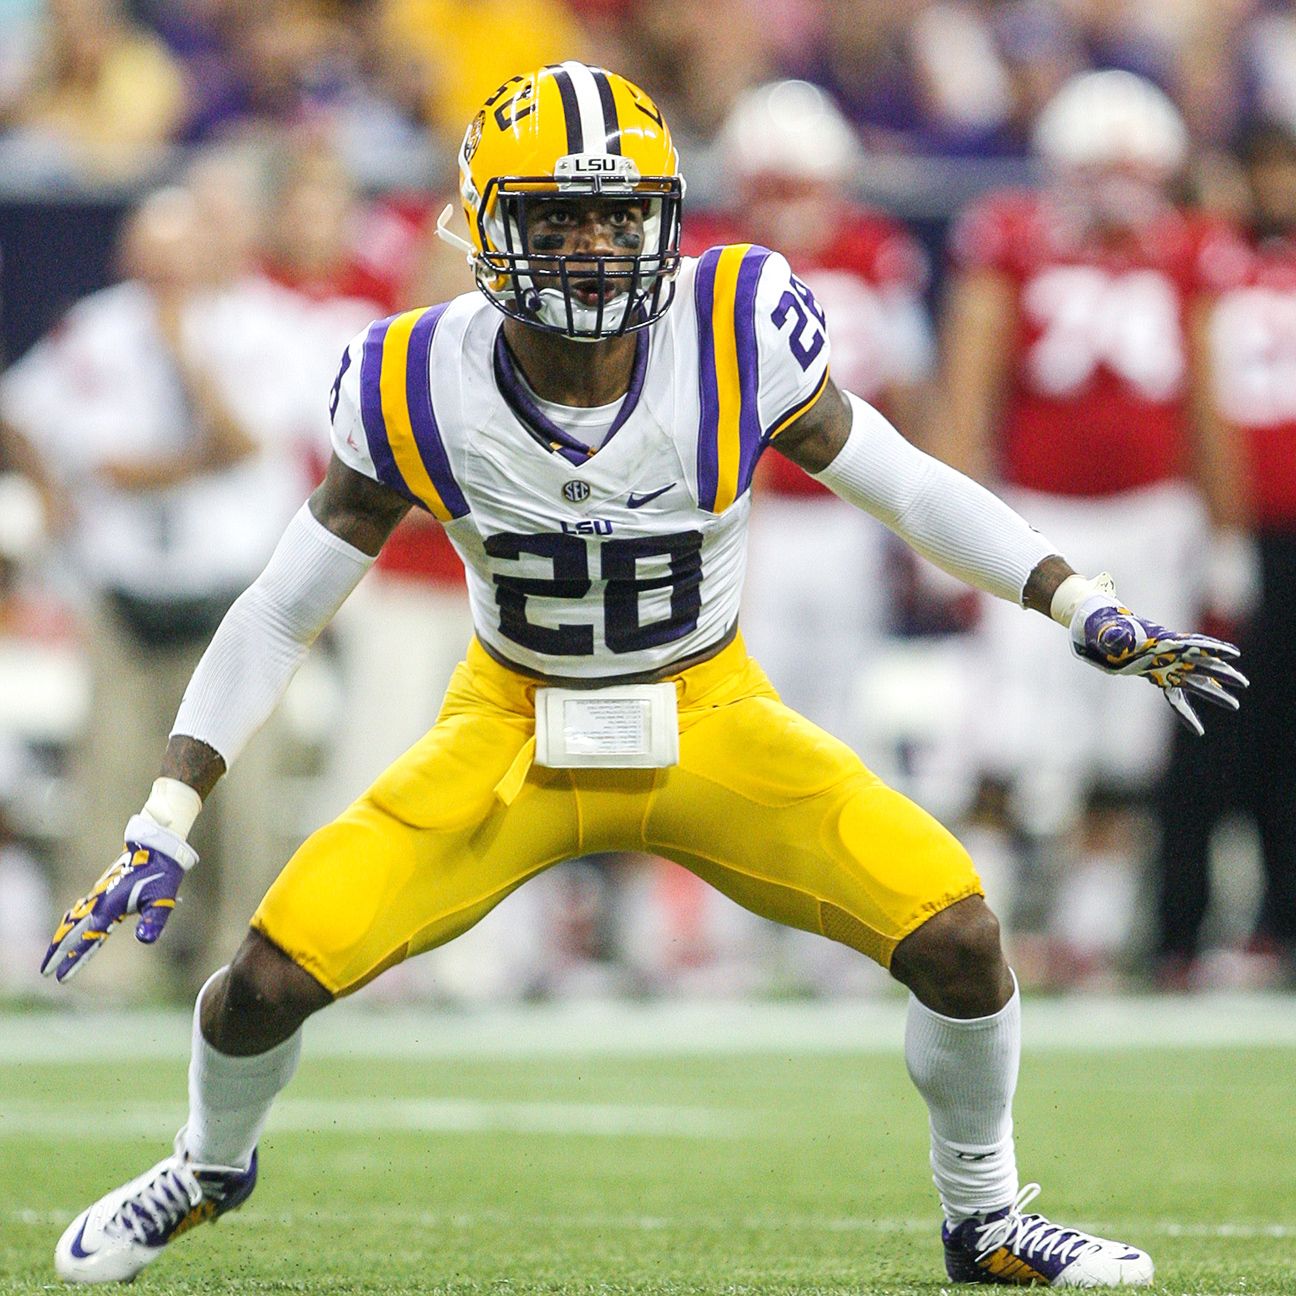 Jalen Mills of LSU Tigers could miss 4-6 weeks with fractured fibula1296 x 1296